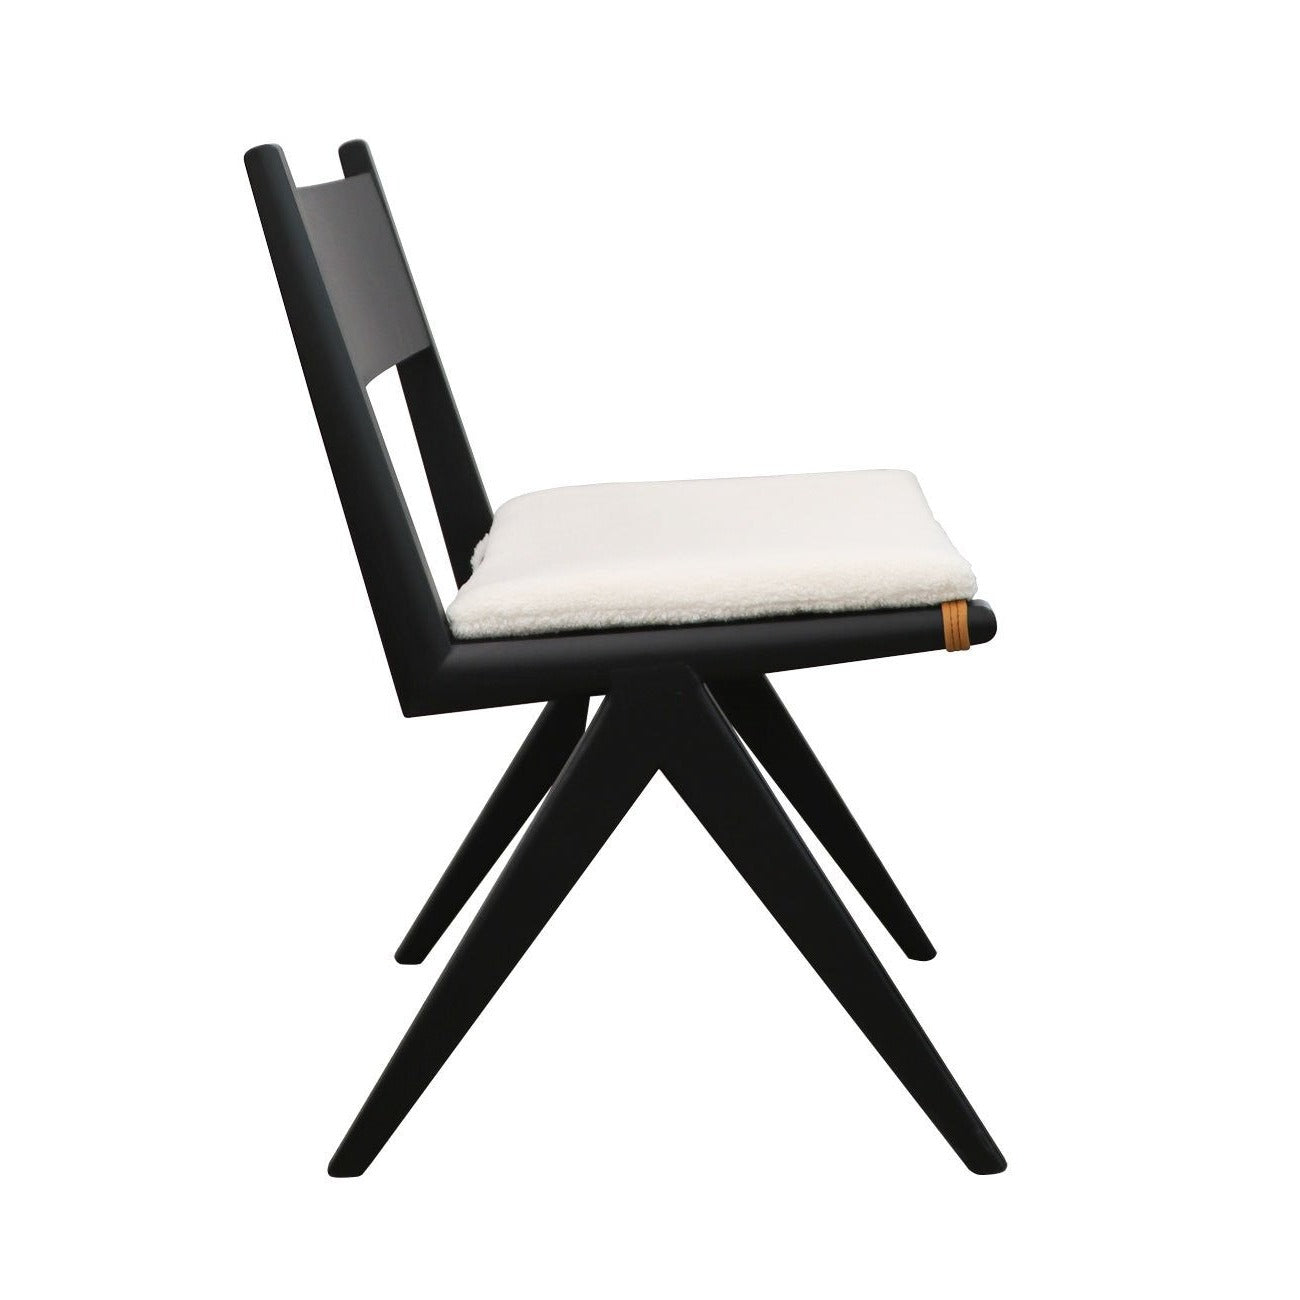 Cleve Dining Chair - Black